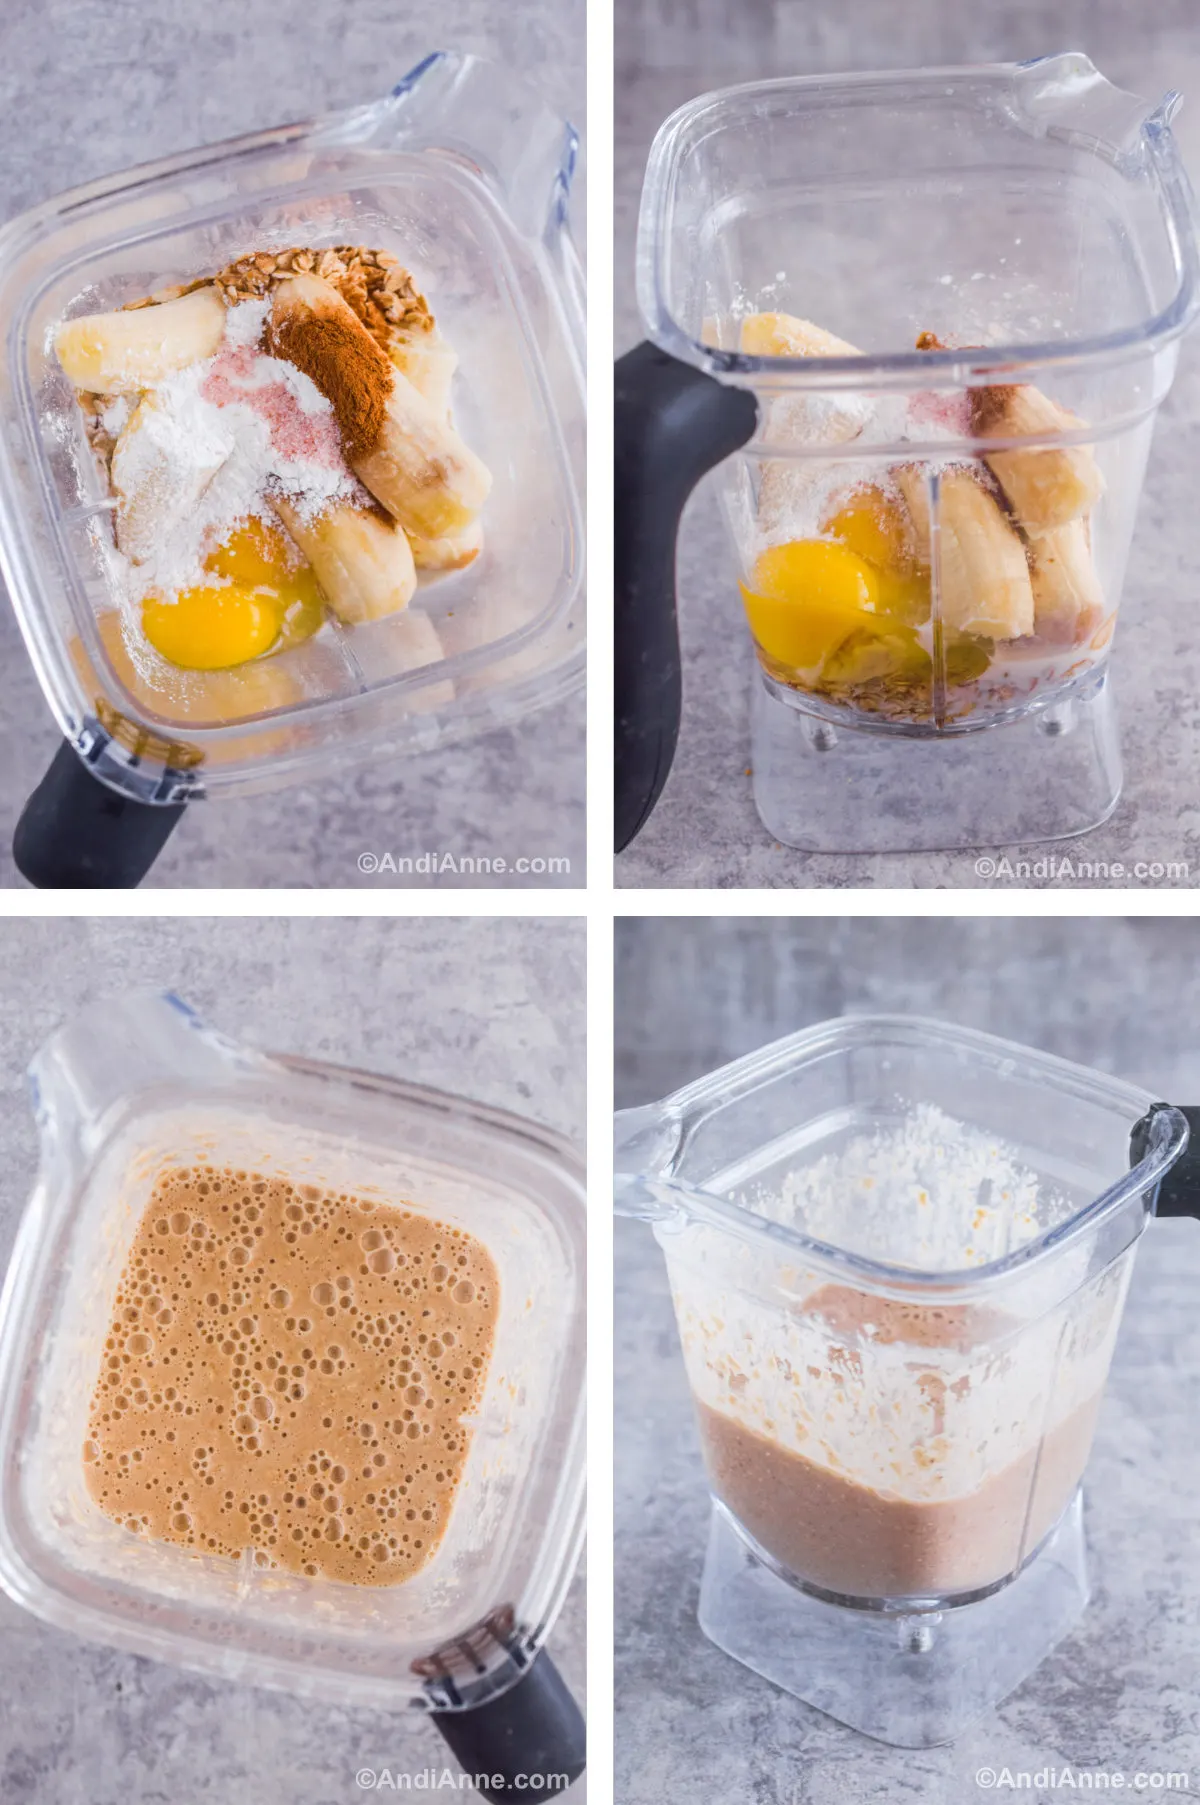 Four images in one: 1. Overhead view of all ingredients in a blender. 2. Side view of ingredients in blender. 3. Overhead view of ingredients blended. 4. Side view of ingredients blended. 